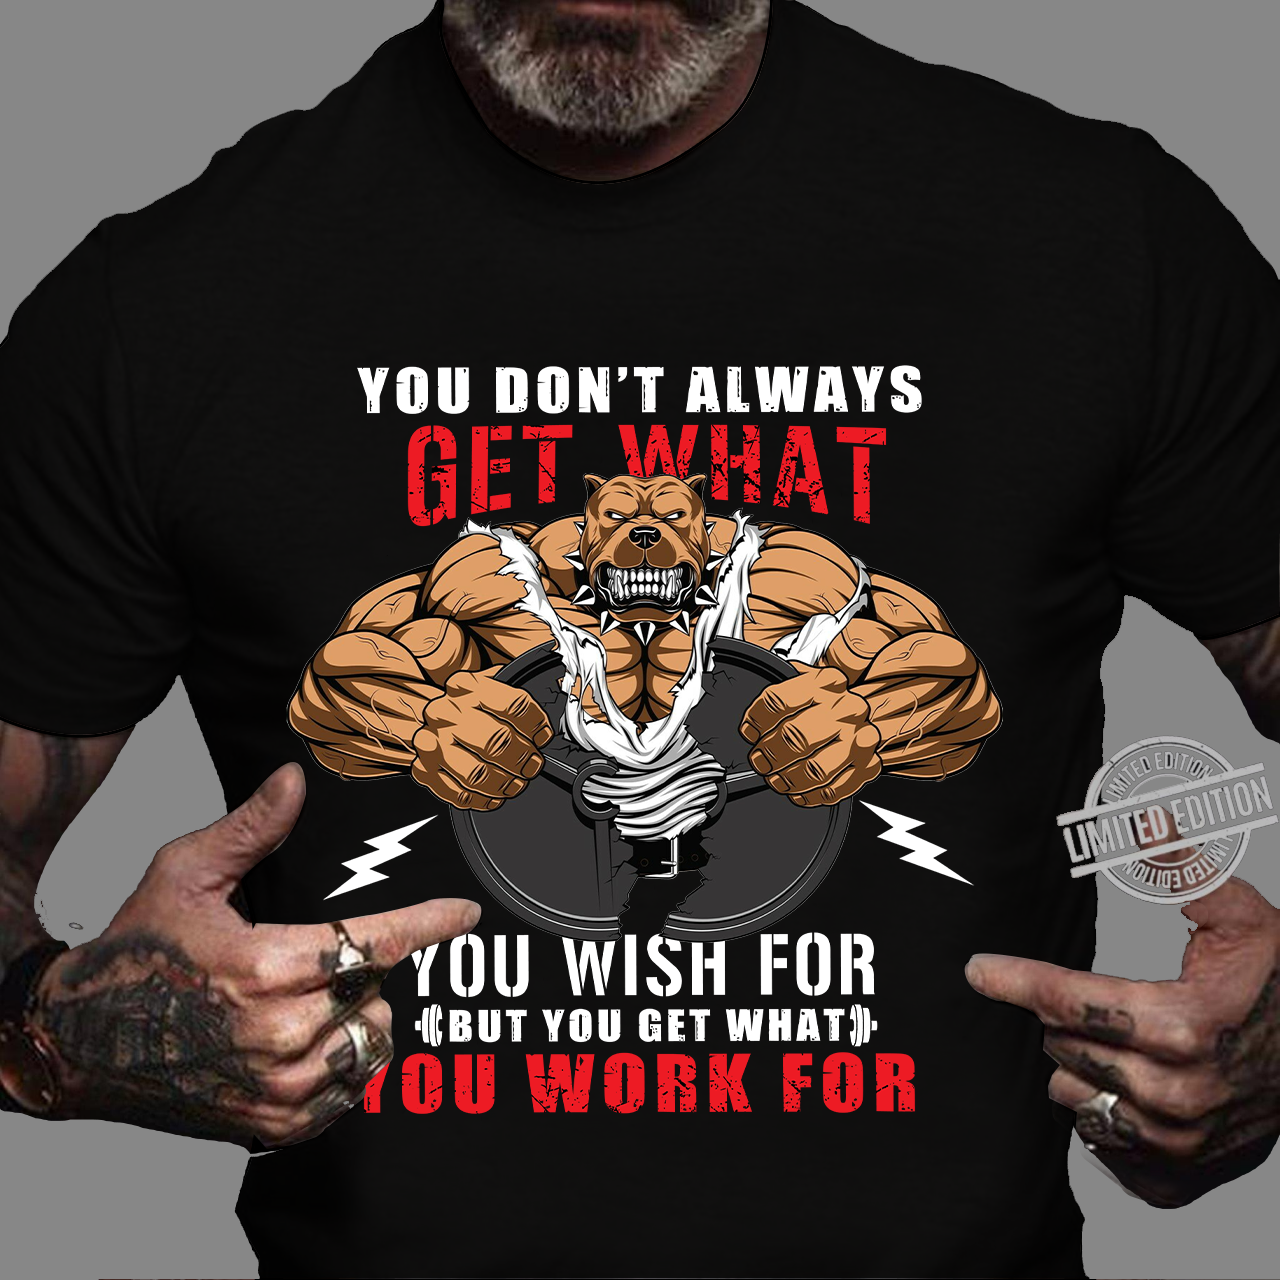 Workout Essential: Bodybuilding T-Shirt Featuring Motivational Quote - Weightlifting Shirts 10532